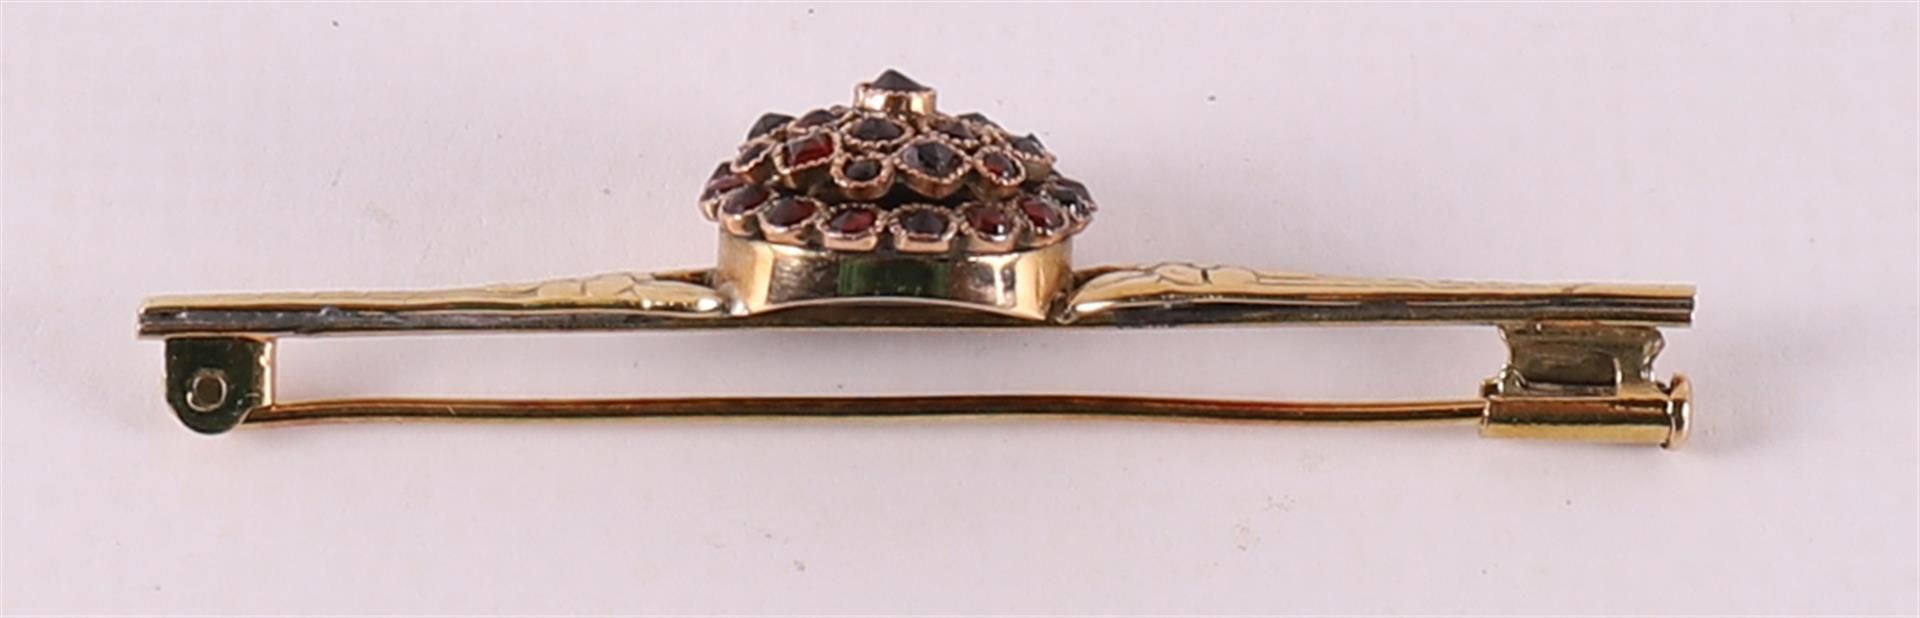 A 14 carat gold brooch set with many faceted garnets, around 1900. - Image 2 of 2